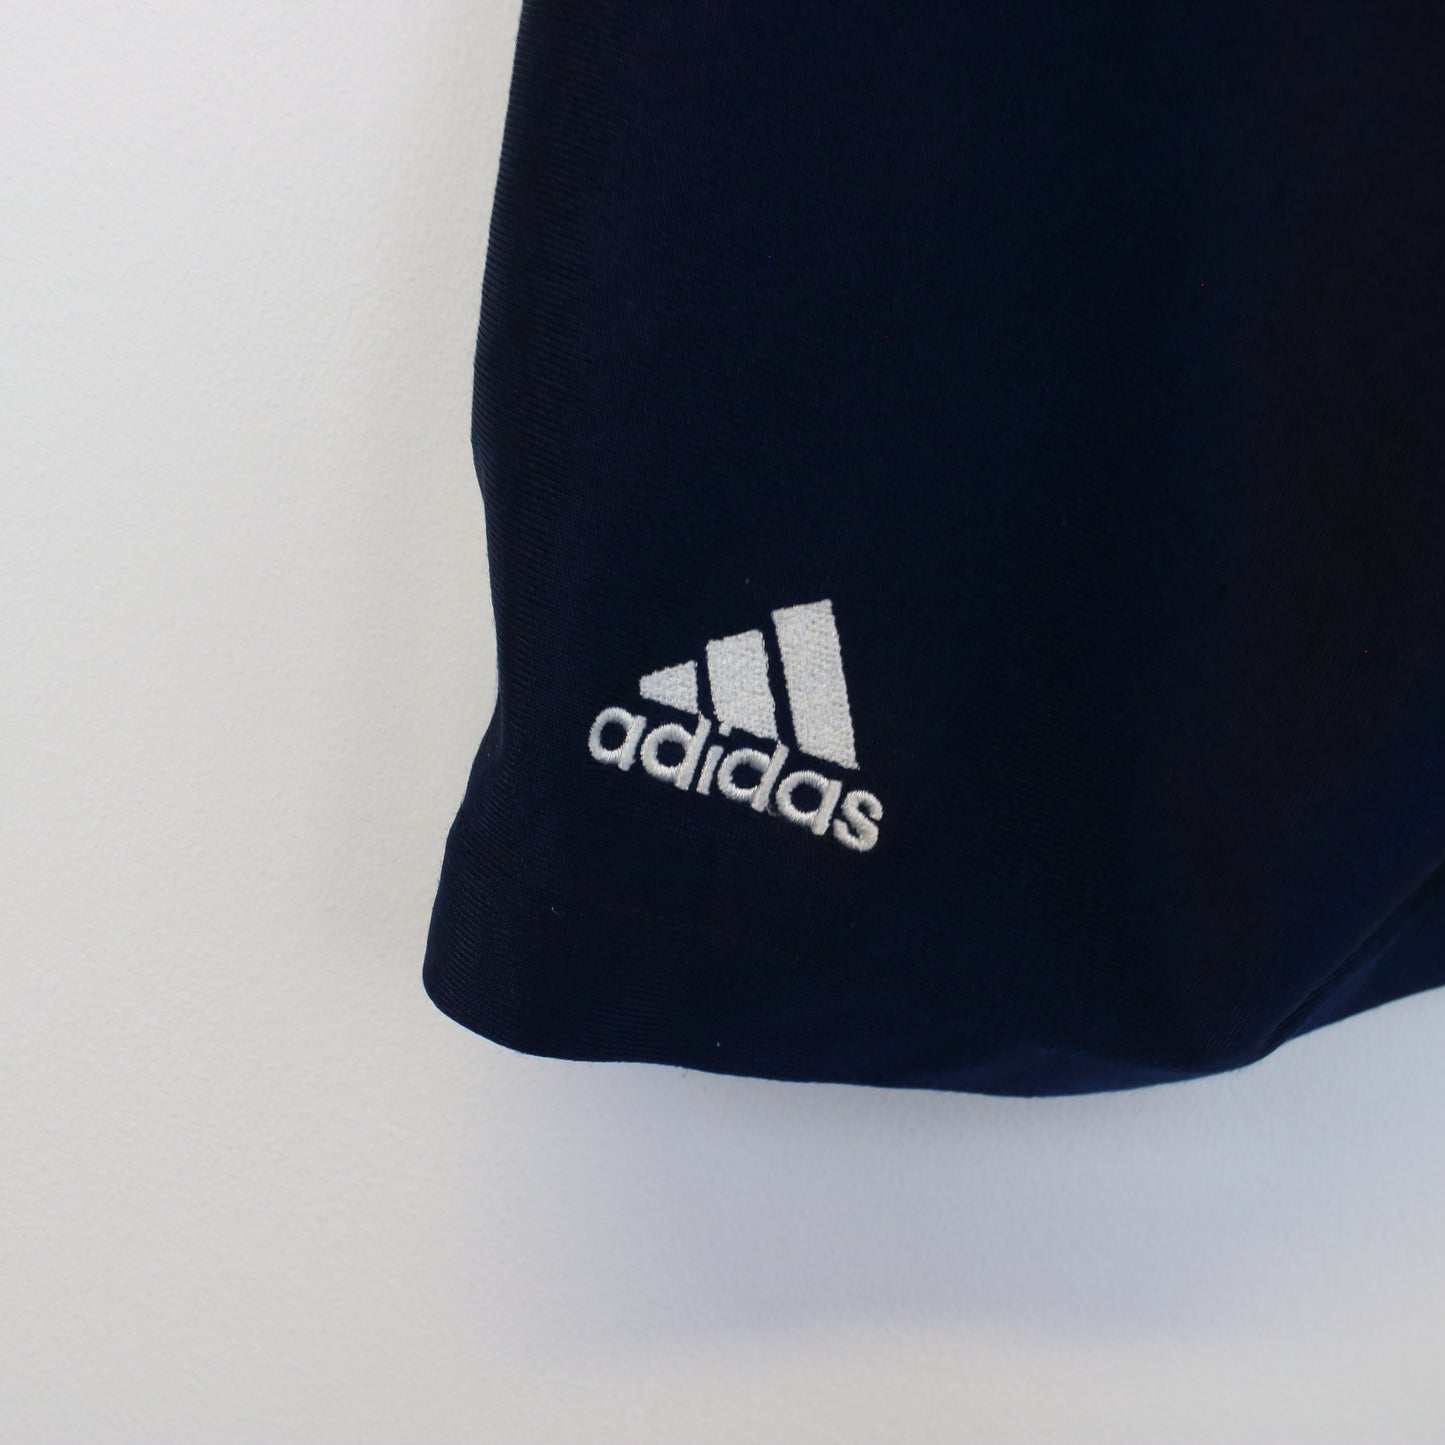 Vintage Adidas shorts in blue. Best fits M